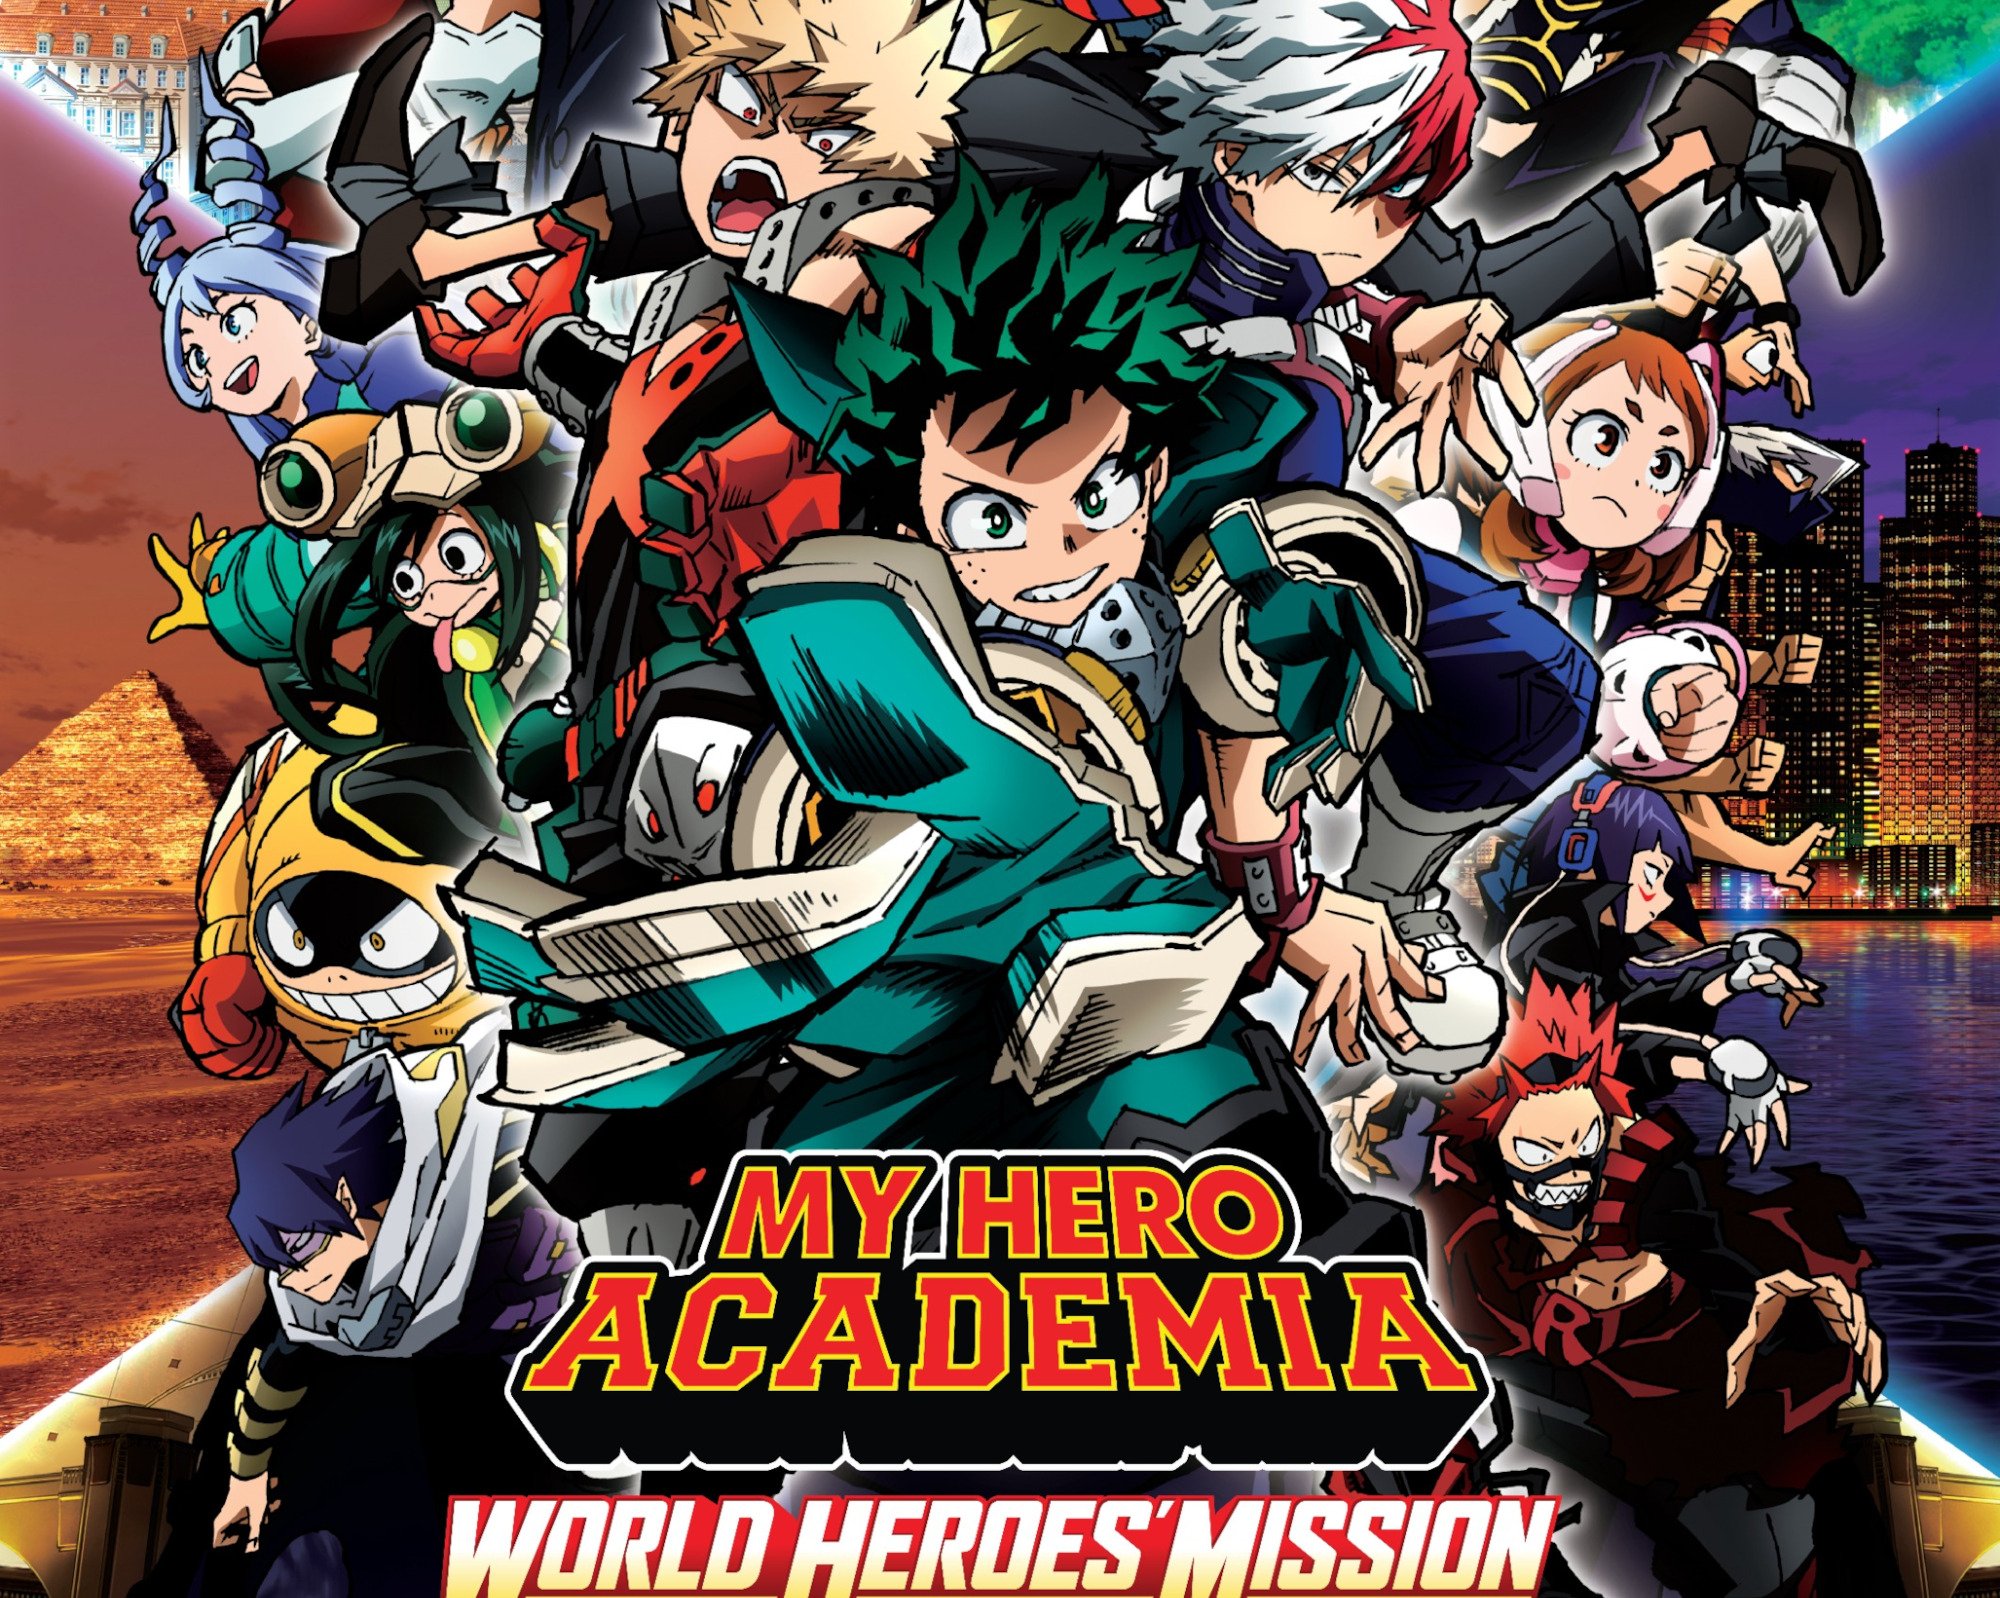 My Hero Academia: World Heroes Mission  Official English Dub Trailer 